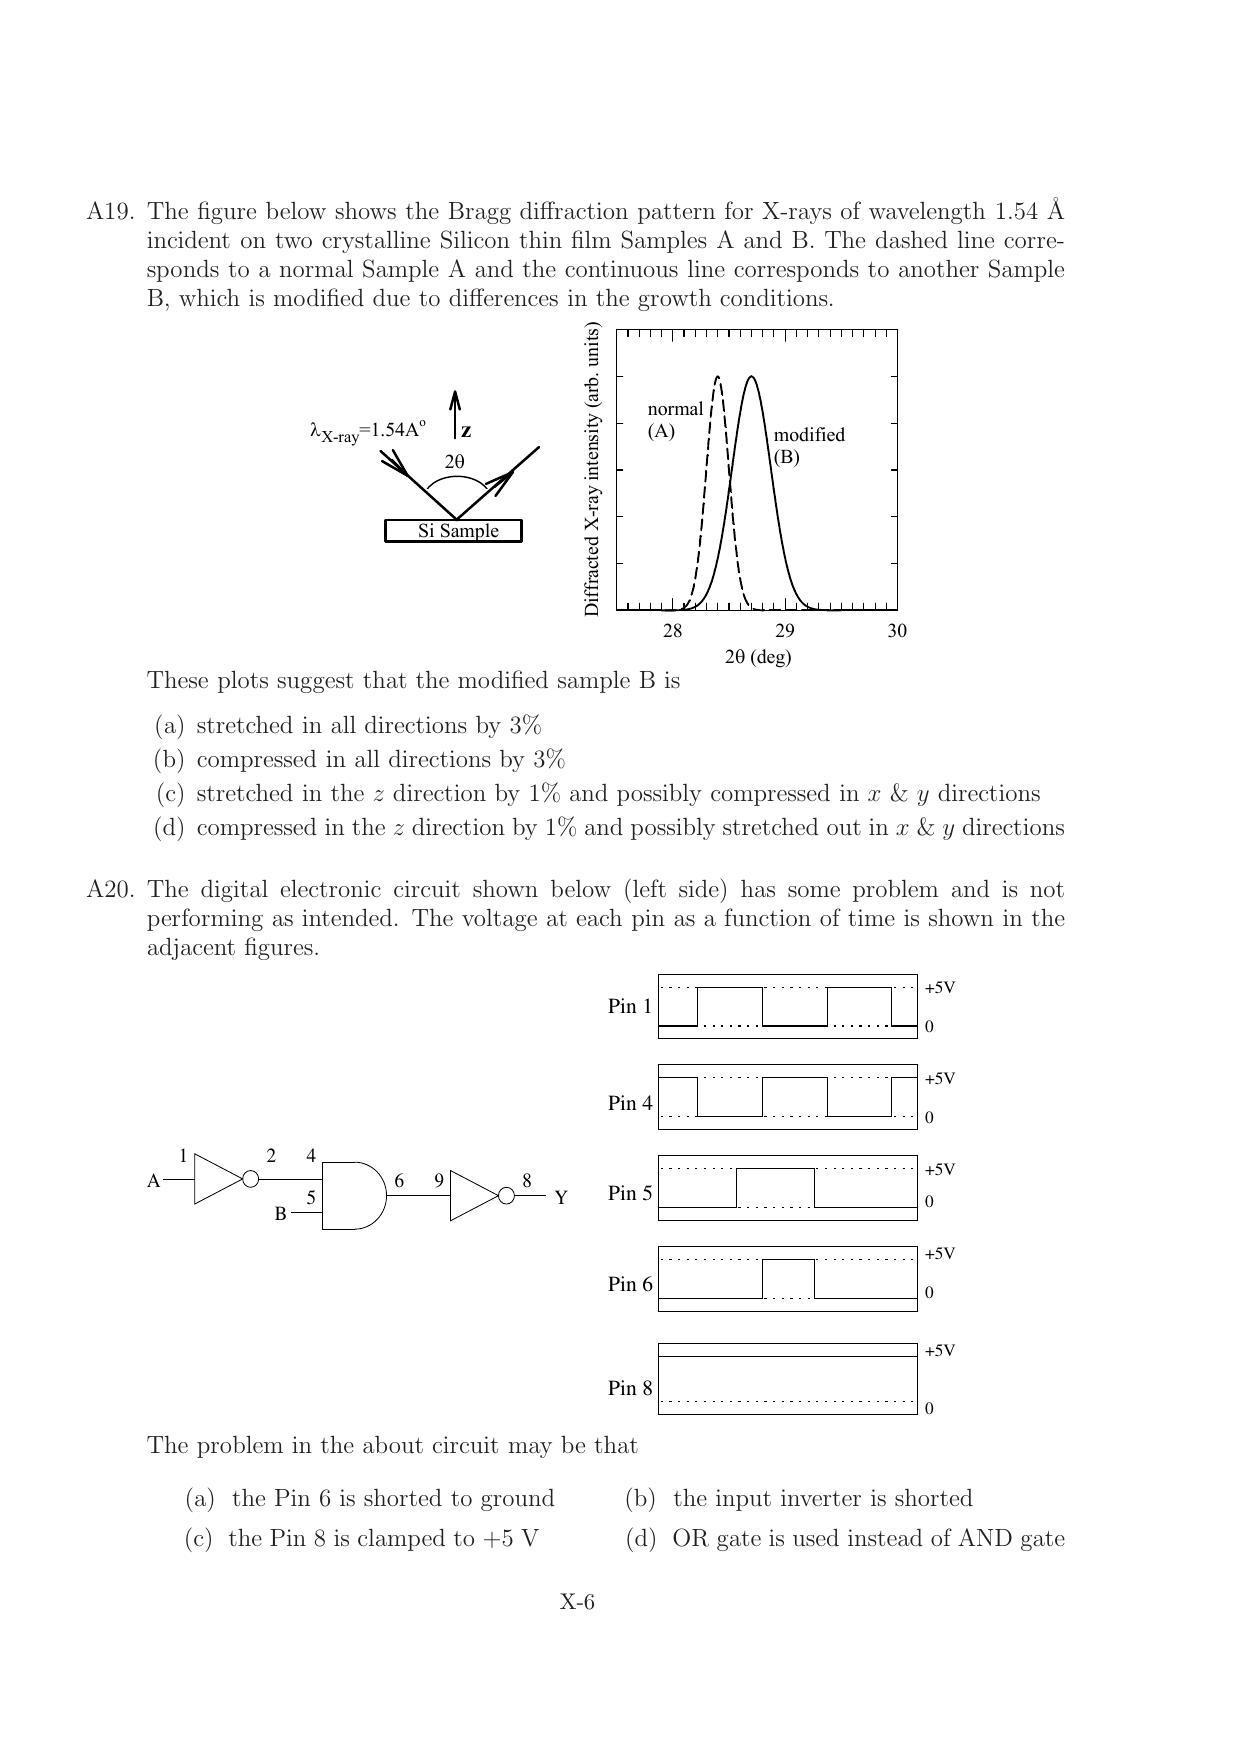 TIFR GS 2011 Physics Question Paper - Page 9